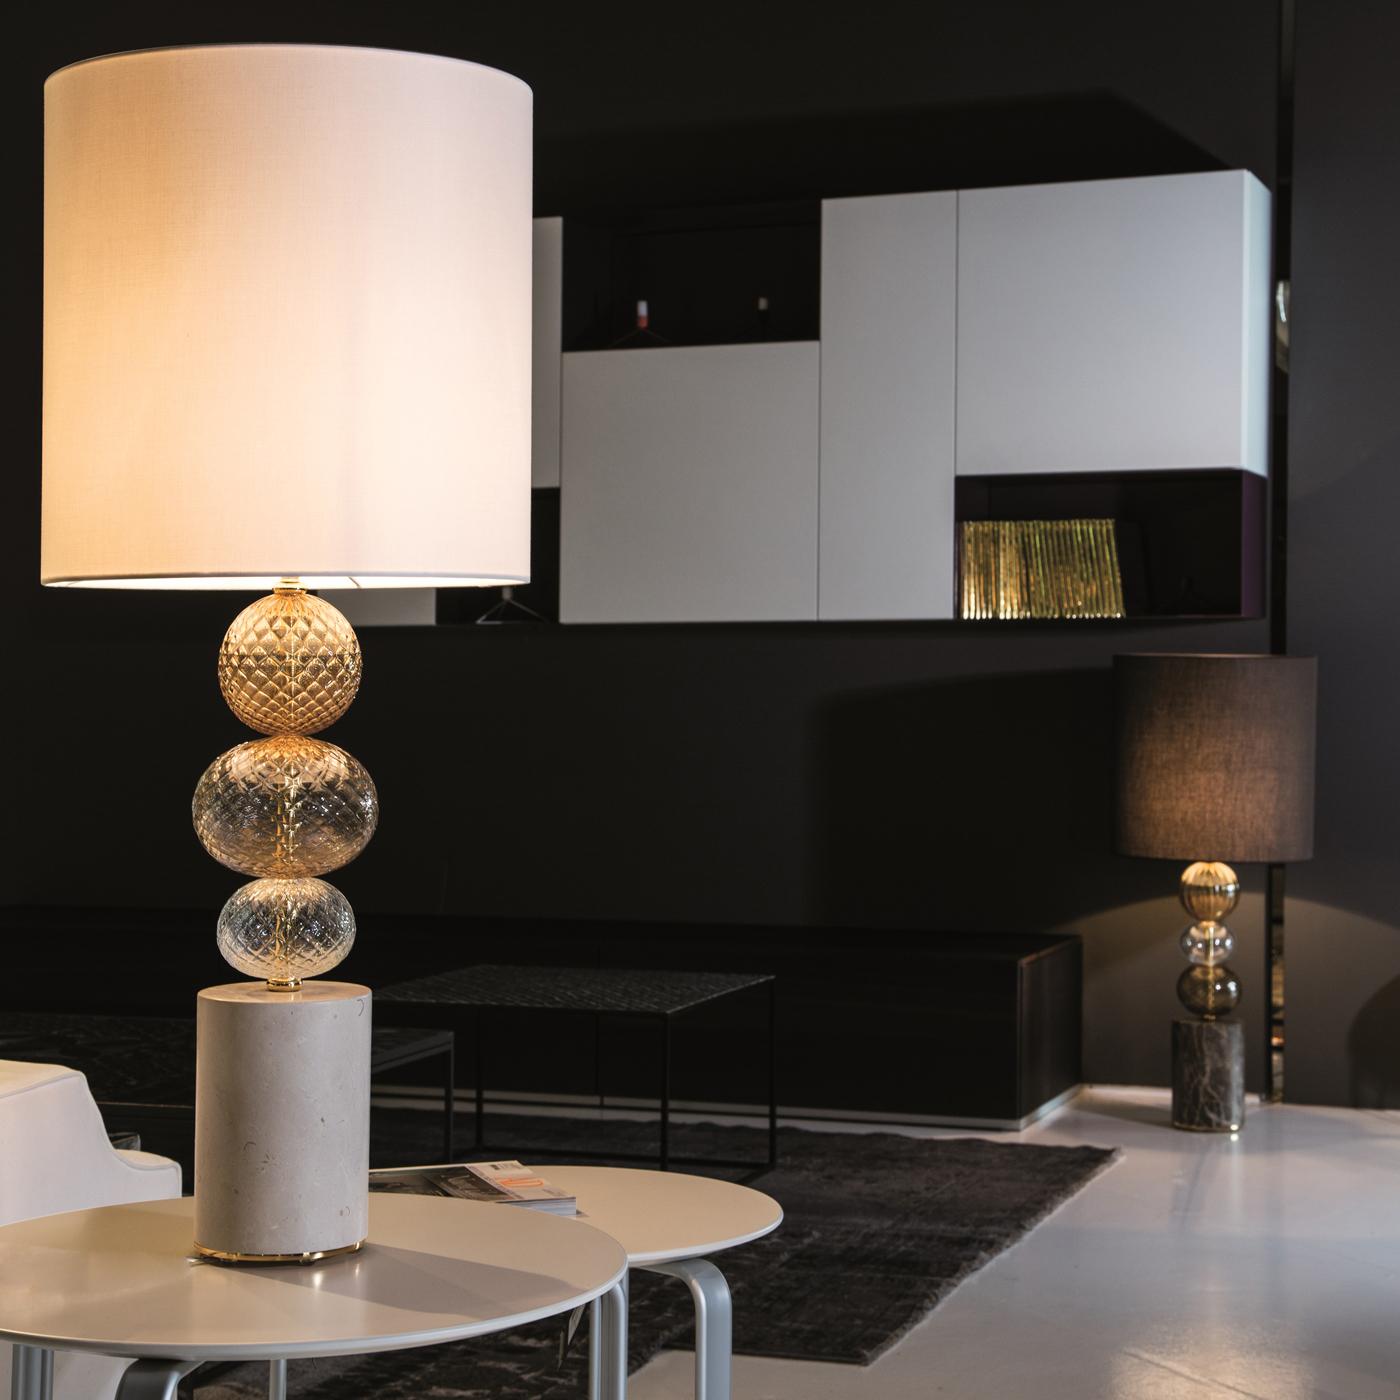 Part of the Satè Collection by Antonio Ventimiglia, this table lamp features a unique design of timeless sophistication that will enrich any room with soft, ambient light. Both the ivory fabric shade and the white marble base have a cylindrical